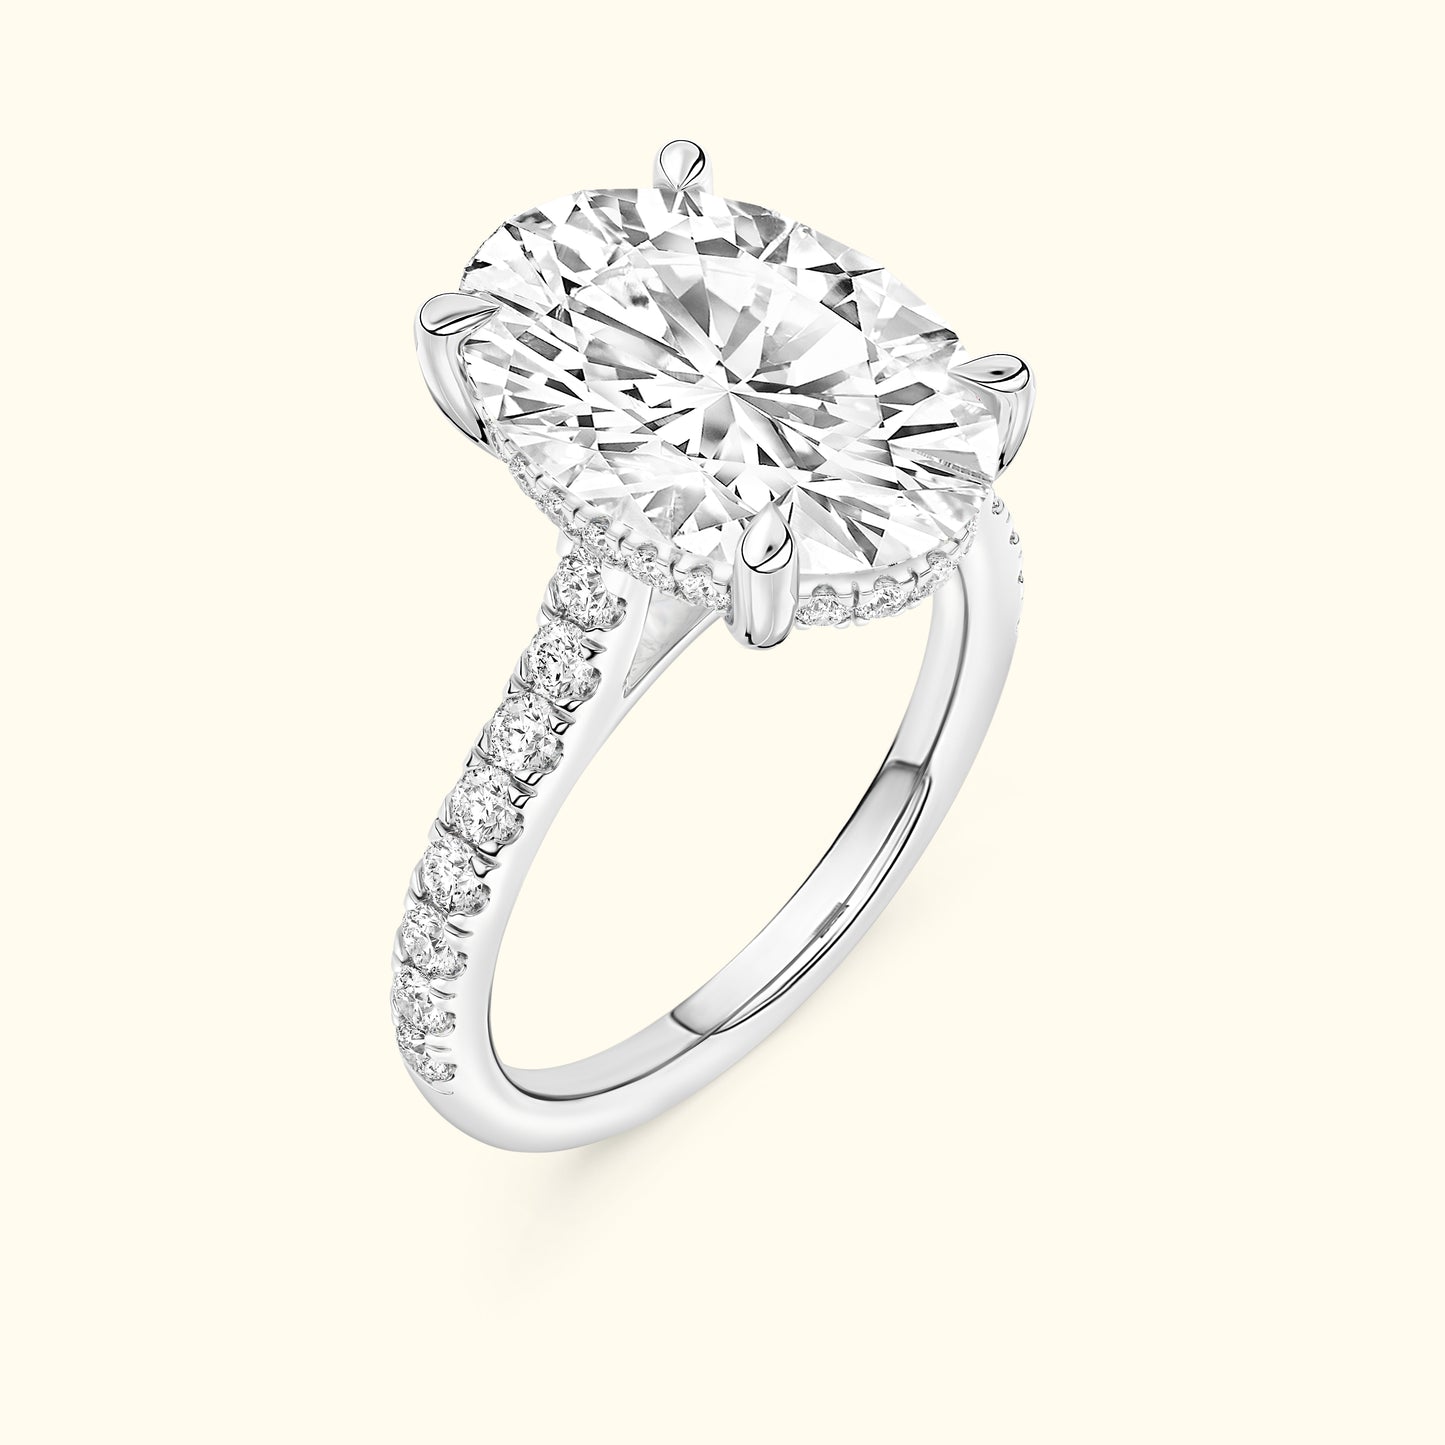 'Elizabeth' Ring with 3.03ct Oval Diamond